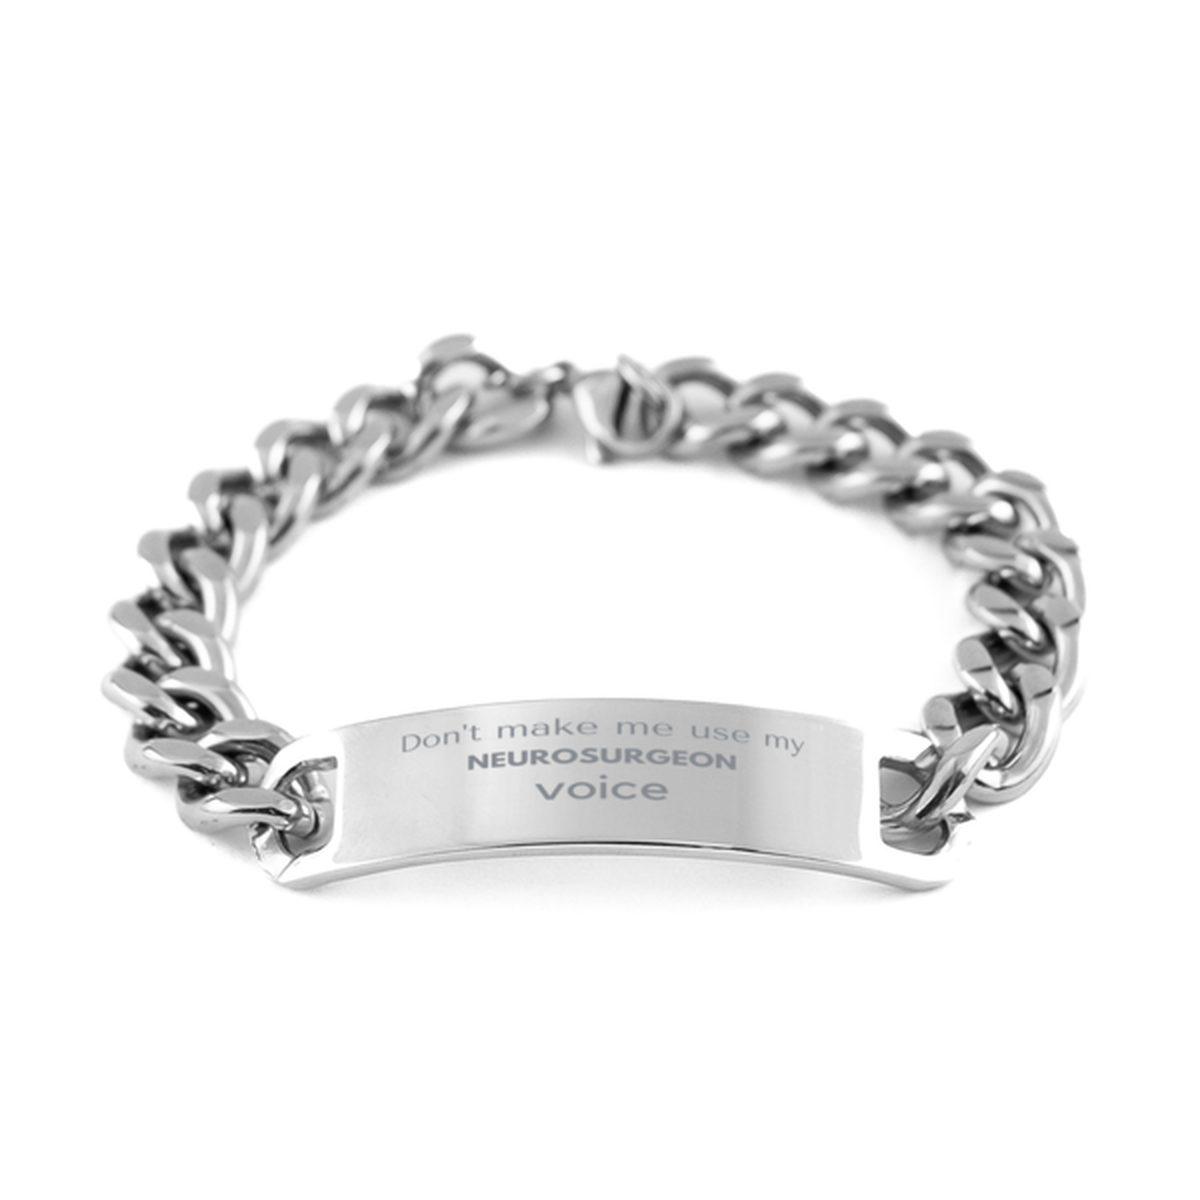 Don't make me use my Neurosurgeon voice, Sarcasm Neurosurgeon Gifts, Christmas Neurosurgeon Cuban Chain Stainless Steel Bracelet Birthday Unique Gifts For Neurosurgeon Coworkers, Men, Women, Colleague, Friends